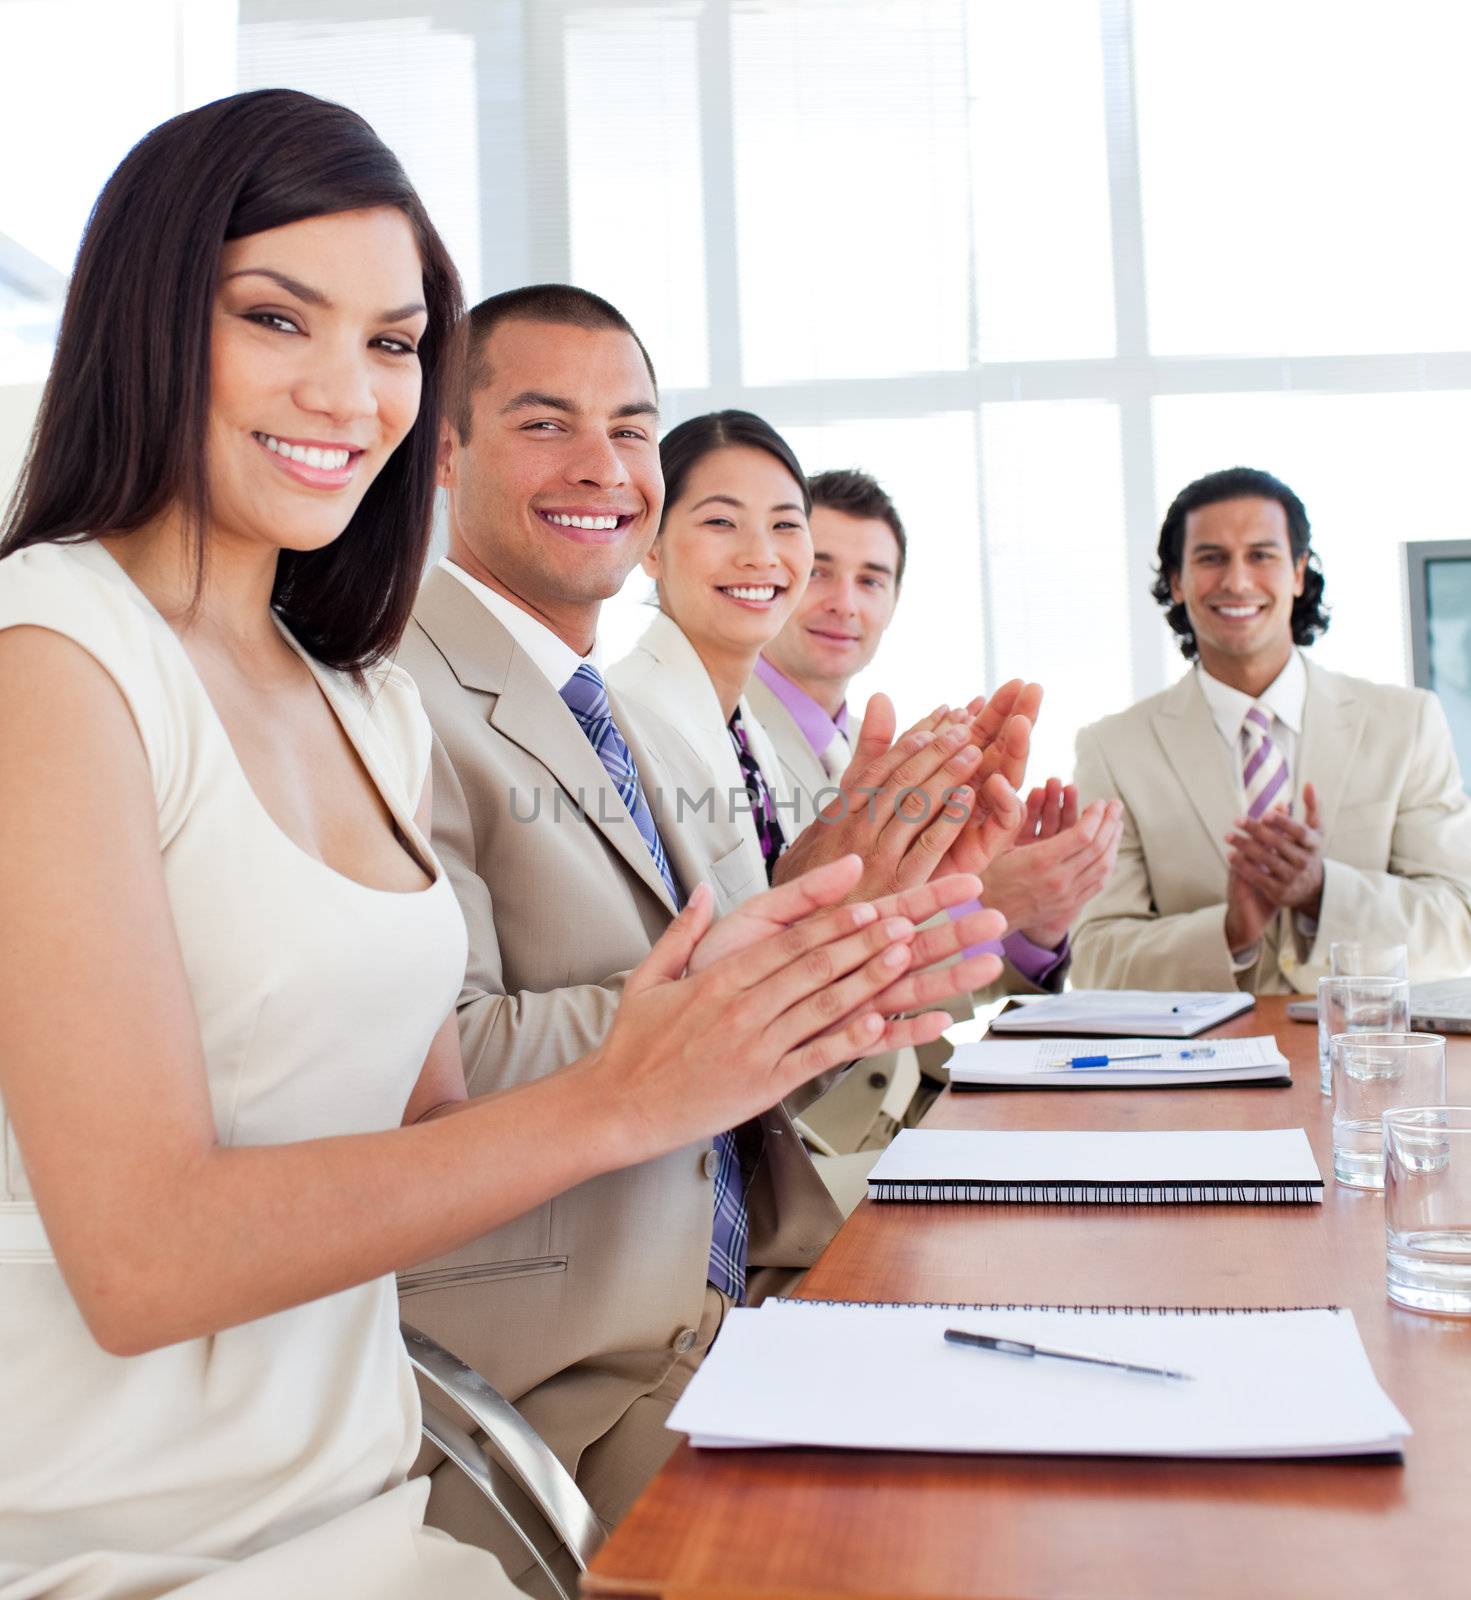 Multi-ethnic business team applauding after a conference by Wavebreakmedia